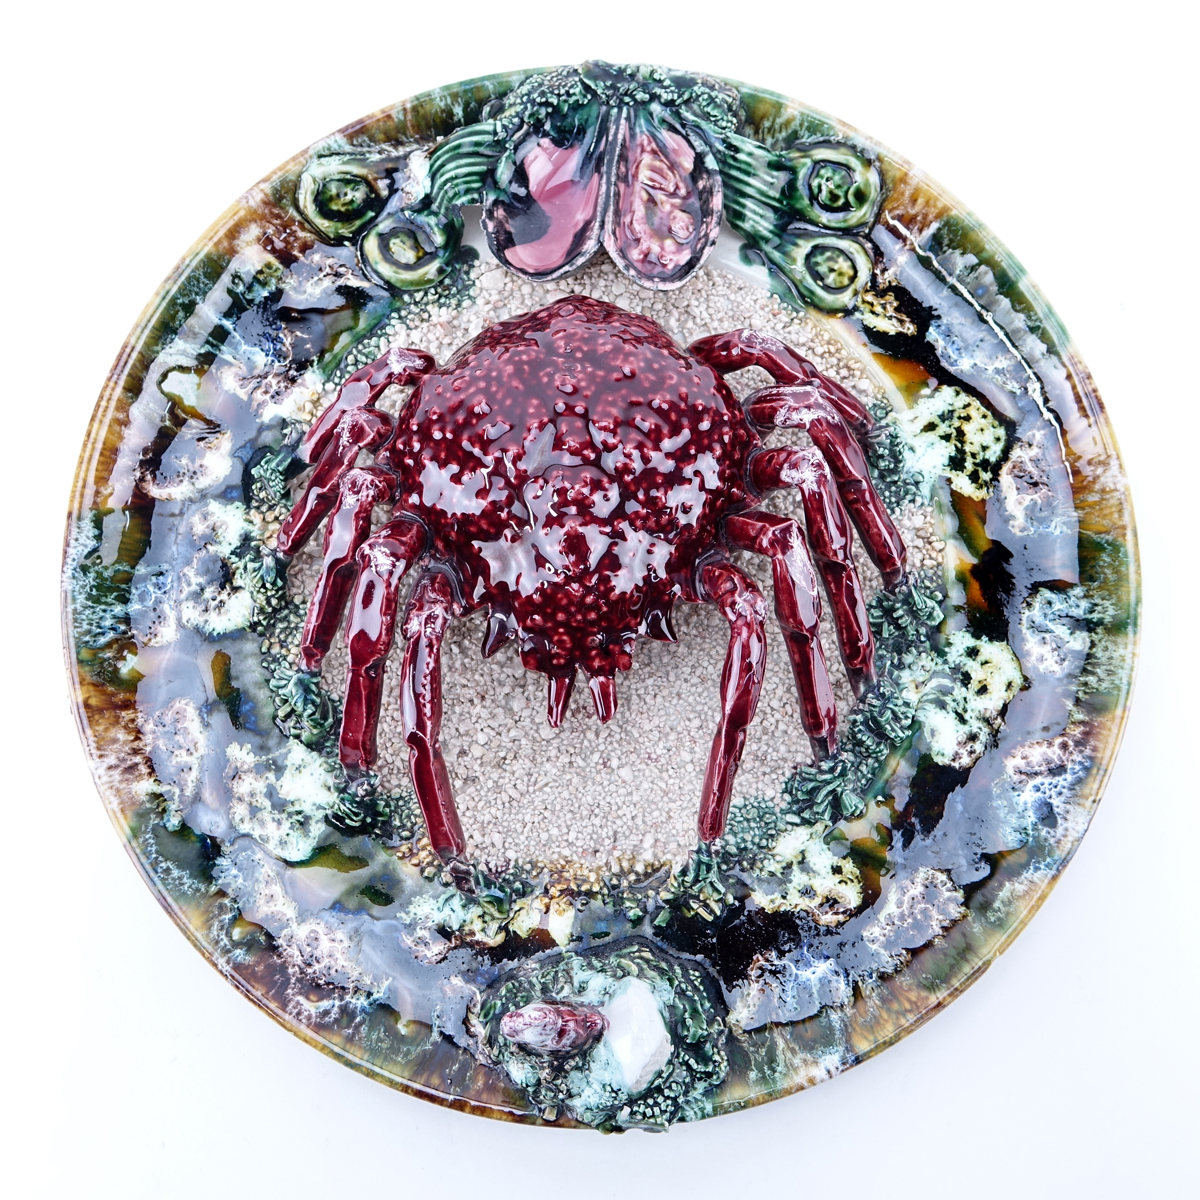 Palissy Style Majolica Pottery Plate with Crab and Mussels Raised Motif. Age appropriate wear overall good condition.